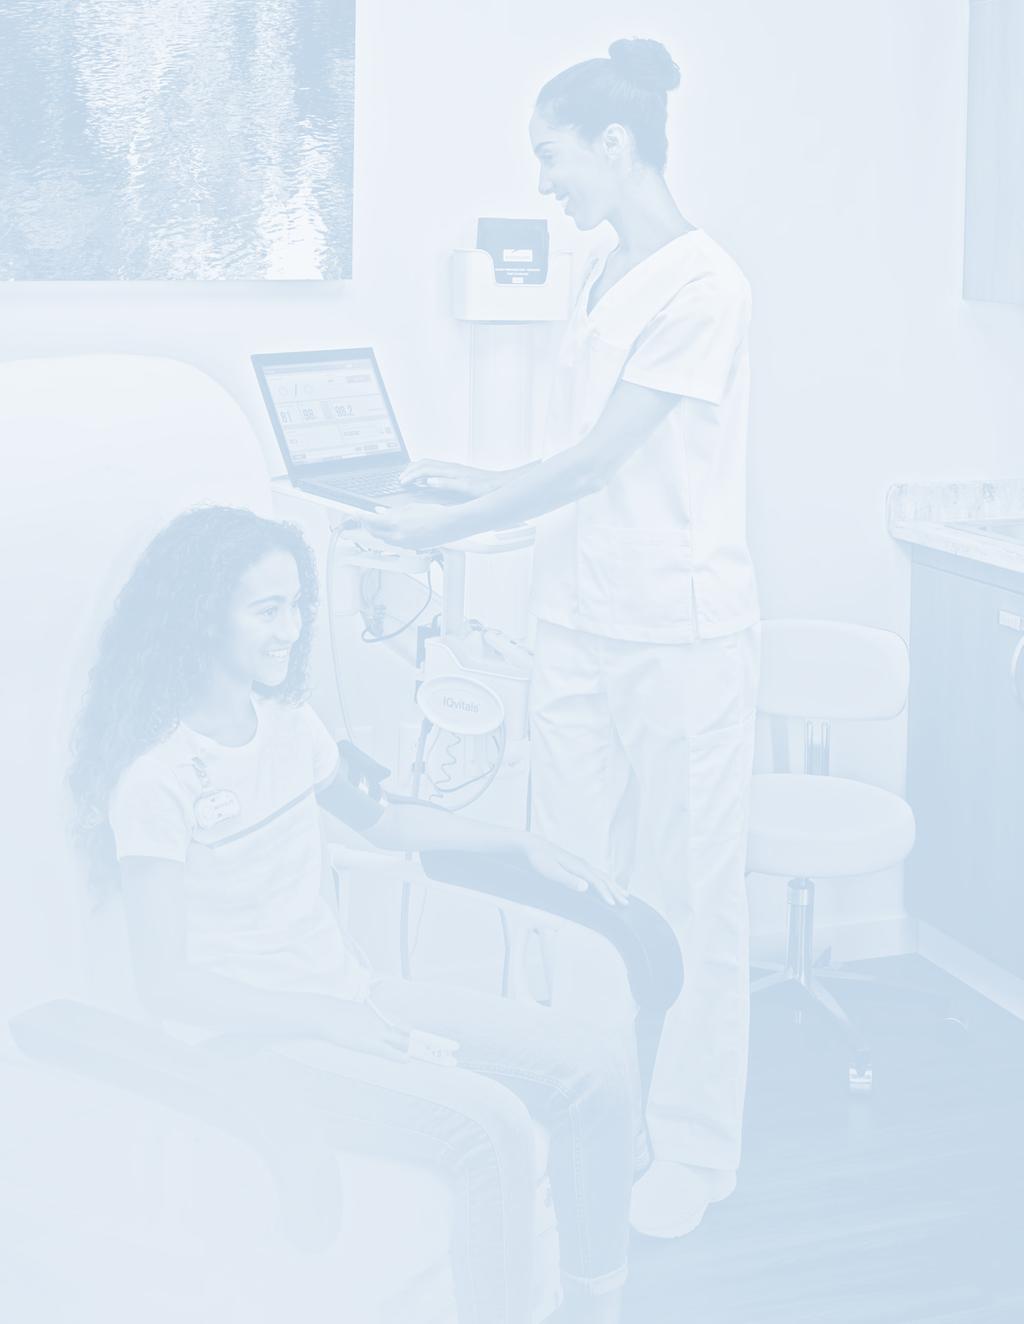 Conclusion Midmark IQvitals Zone technology offers a major step forward in the effort to establish a fully connected point of care ecosystem.